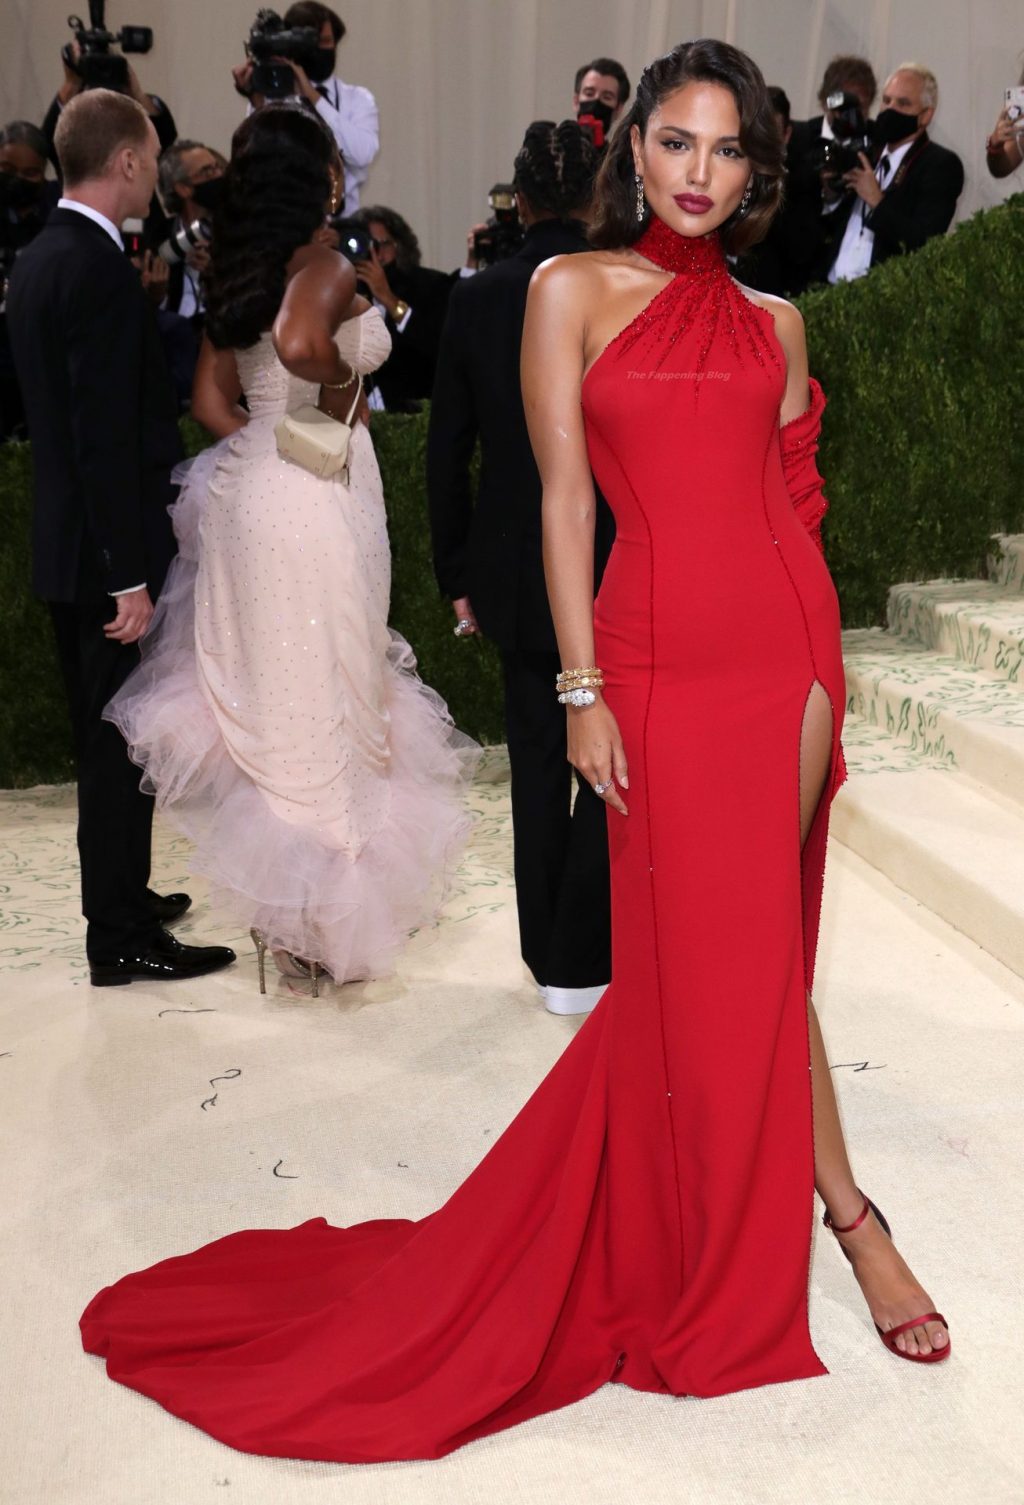 Eiza Gonzalez Pays Homage to Ava Gardner in Scarlet Versace Gown With High Thigh Slit at Met Gala (100 Photos) [Updated]